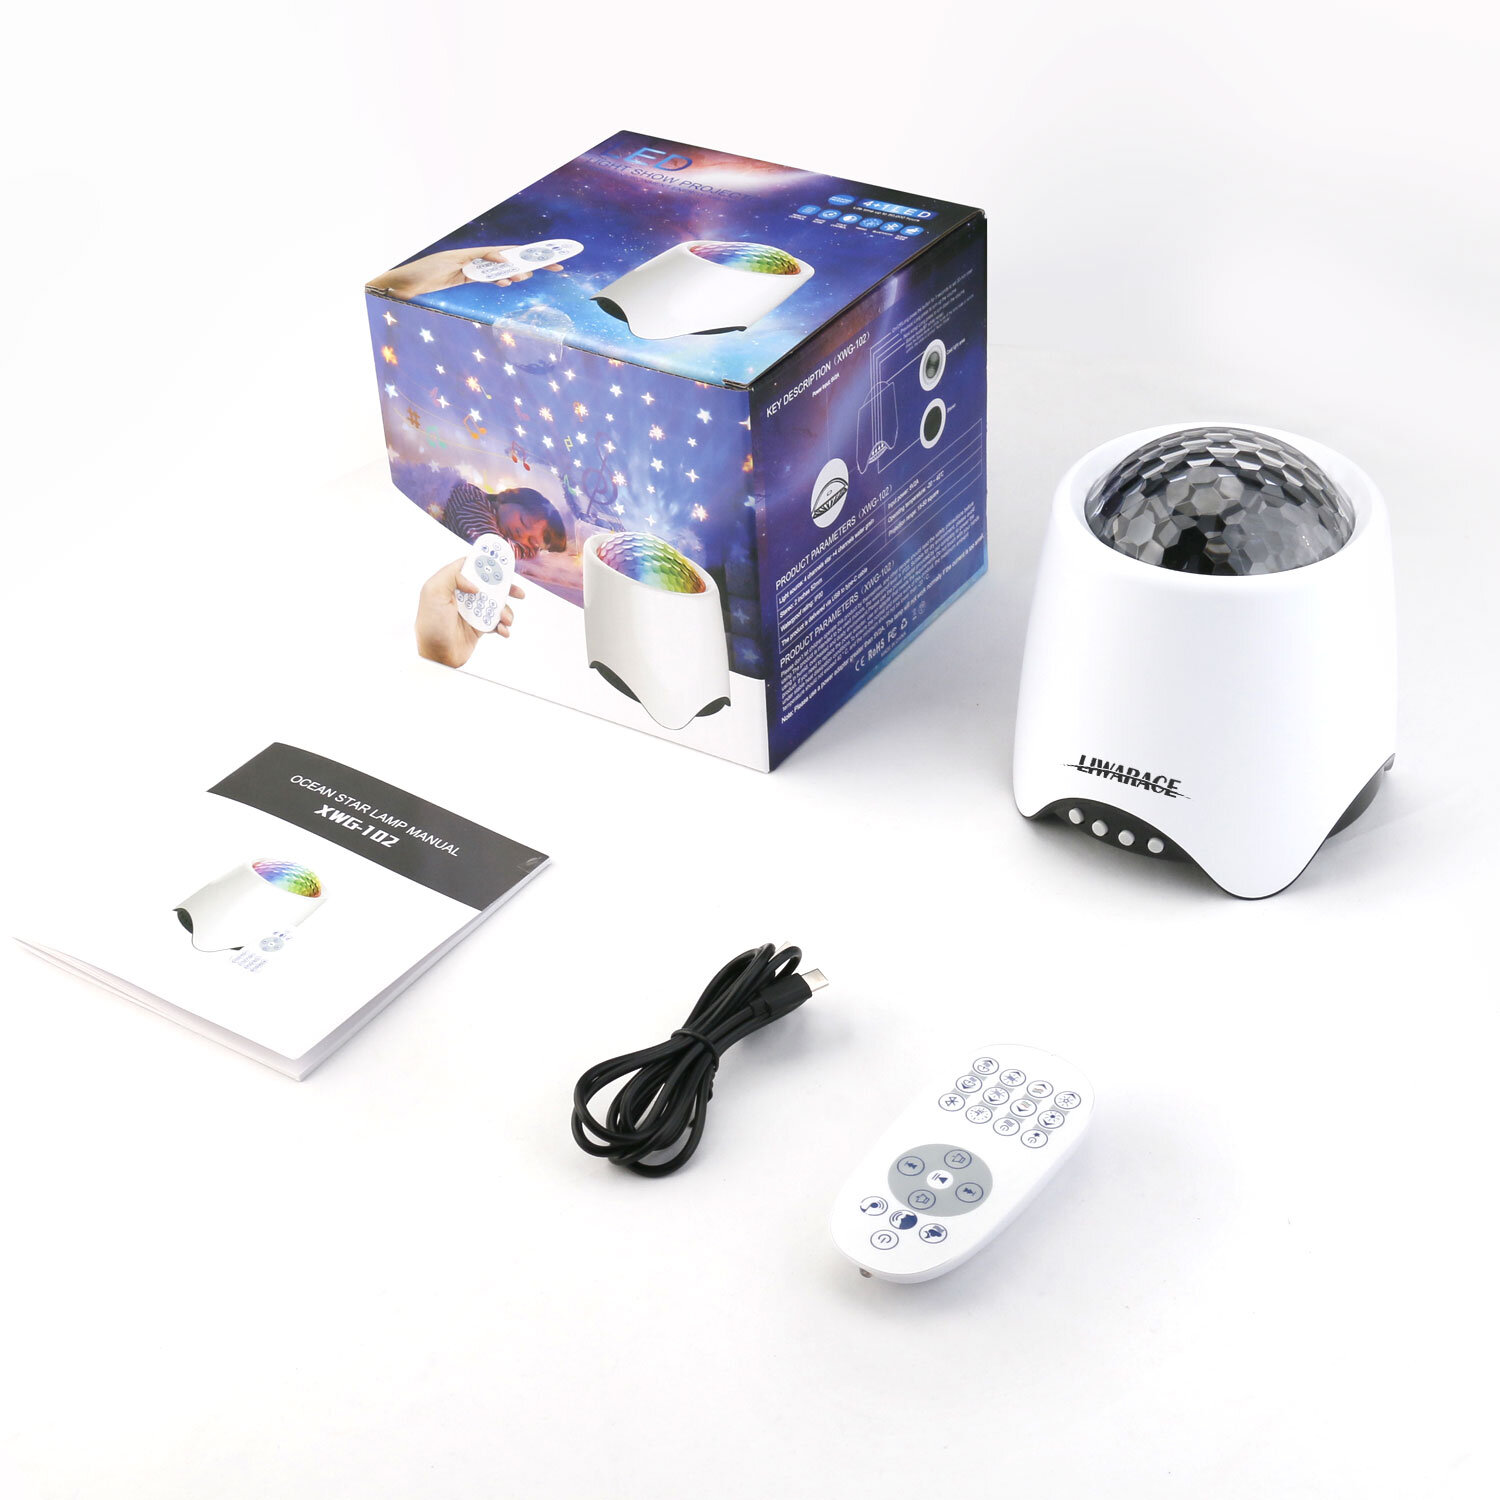 Starlight Deep3-in-1 Starlight Projector With Bluetooth & Voice